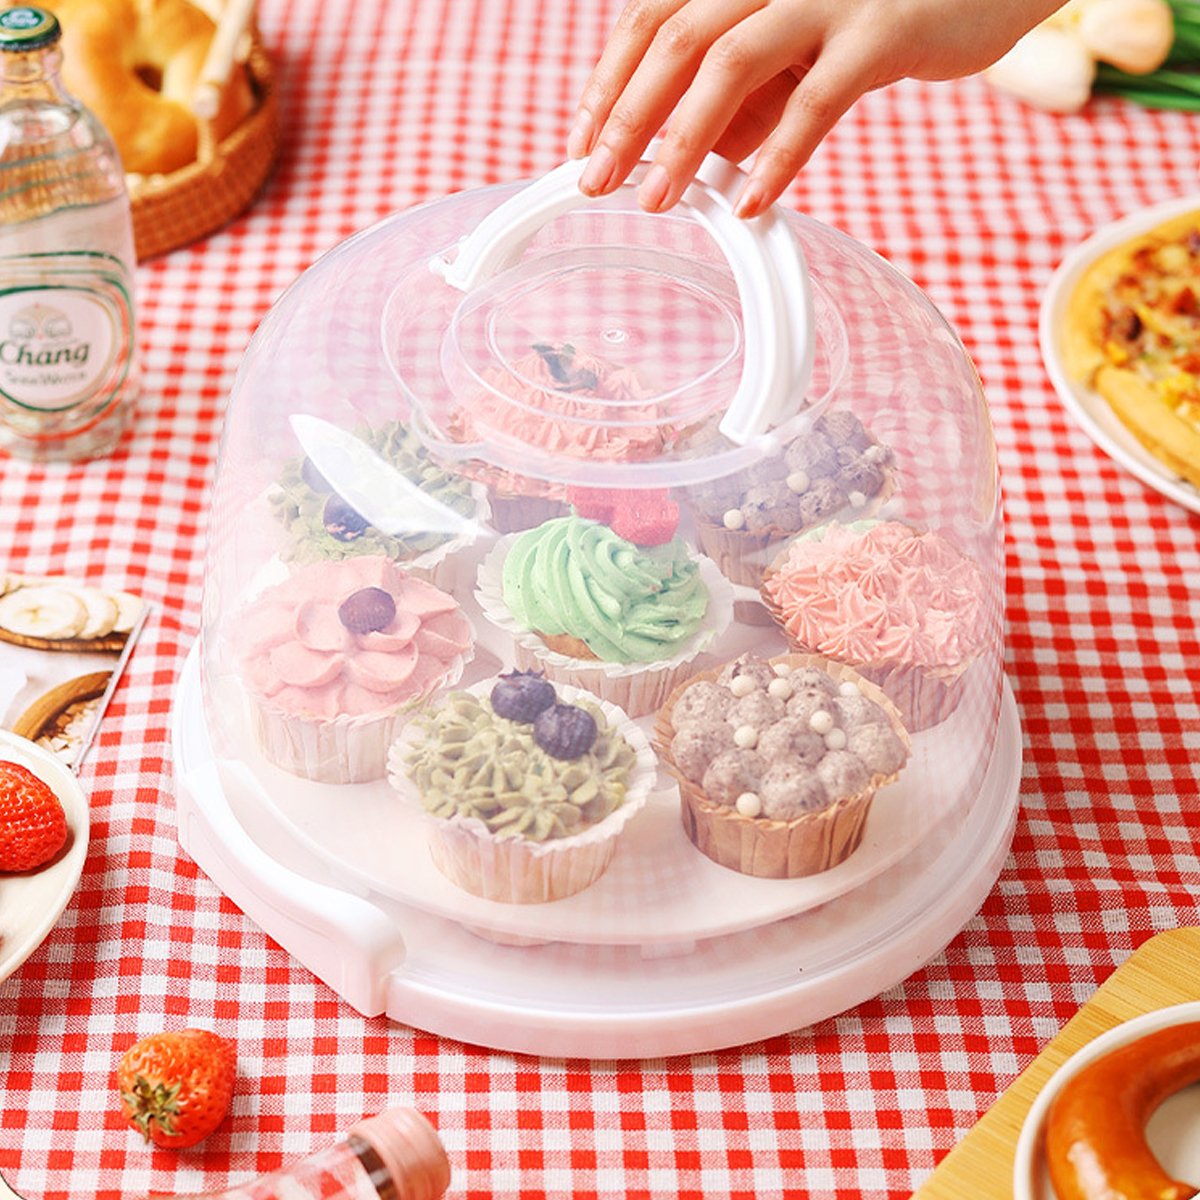 Effortlessly Transport Your Cakes with a Reusable PP Portable Cake Box